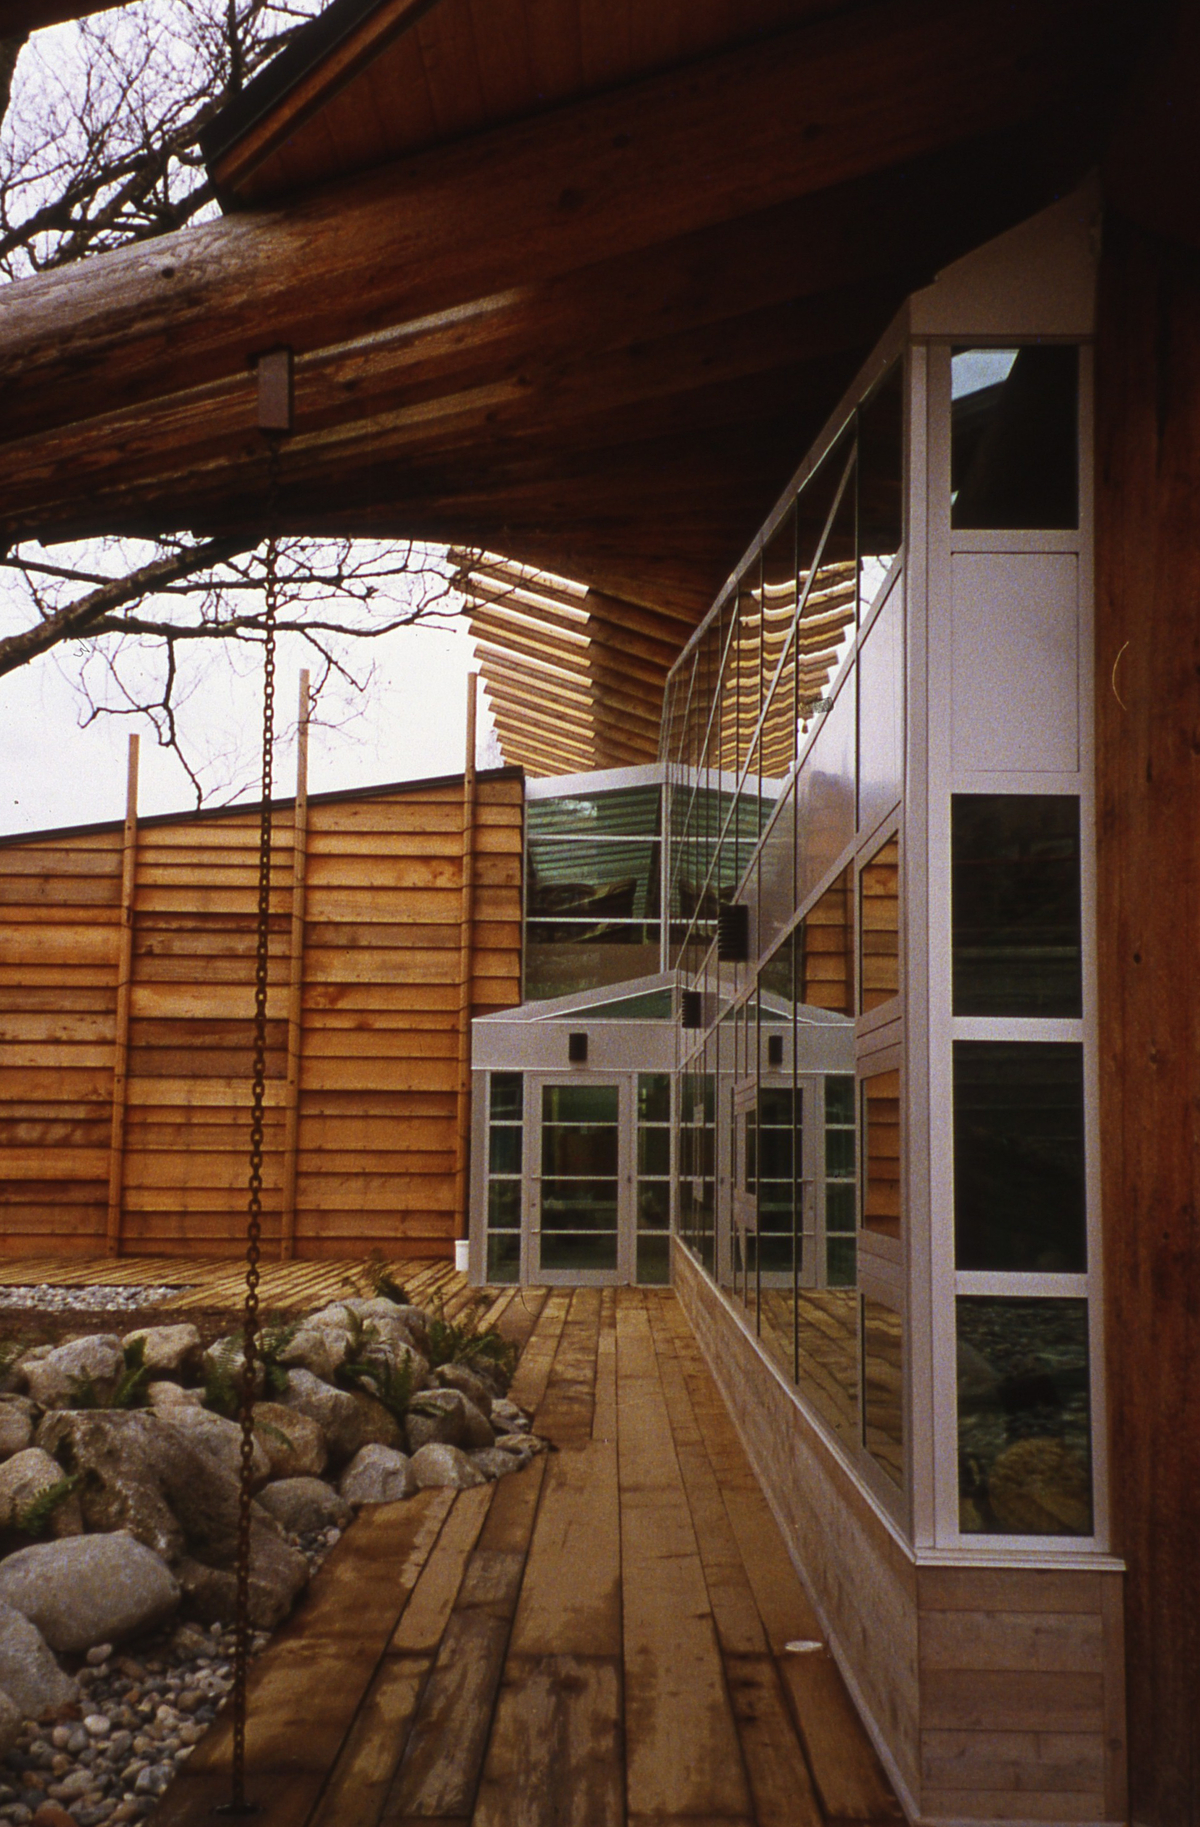 Outdoor daytime close up image of First Nations Longhouse at The University of British Columbia showing glass and wood exterior topped with mass timber solid sawn heavy timber roof structure designed to resemble the wing of a bird in flight